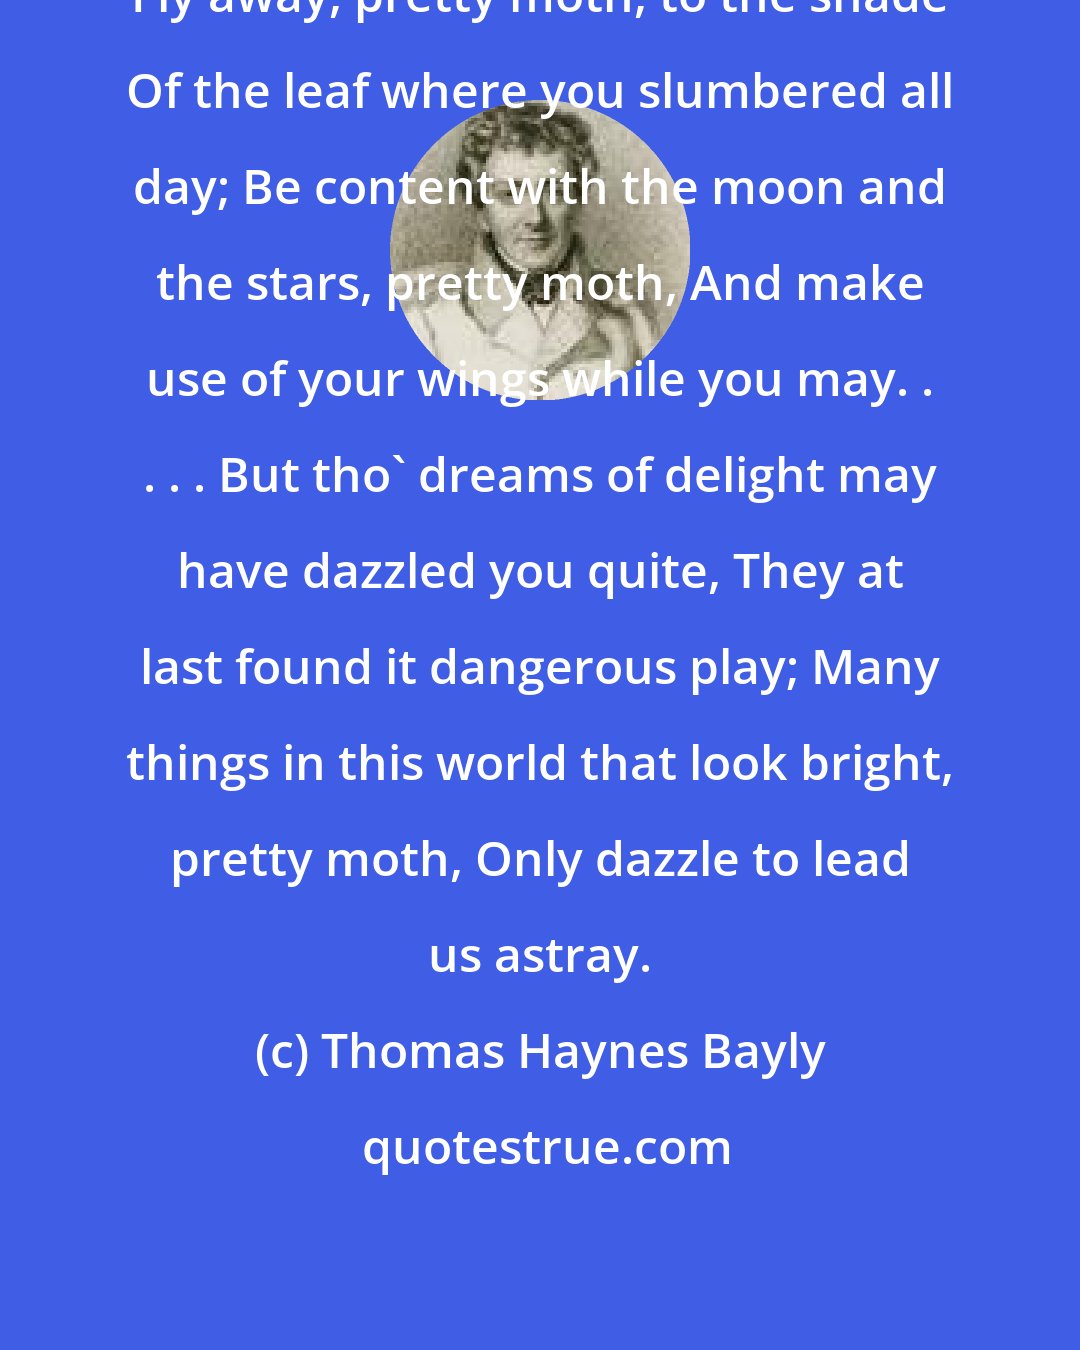 Thomas Haynes Bayly: Fly away, pretty moth, to the shade Of the leaf where you slumbered all day; Be content with the moon and the stars, pretty moth, And make use of your wings while you may. . . . . But tho' dreams of delight may have dazzled you quite, They at last found it dangerous play; Many things in this world that look bright, pretty moth, Only dazzle to lead us astray.